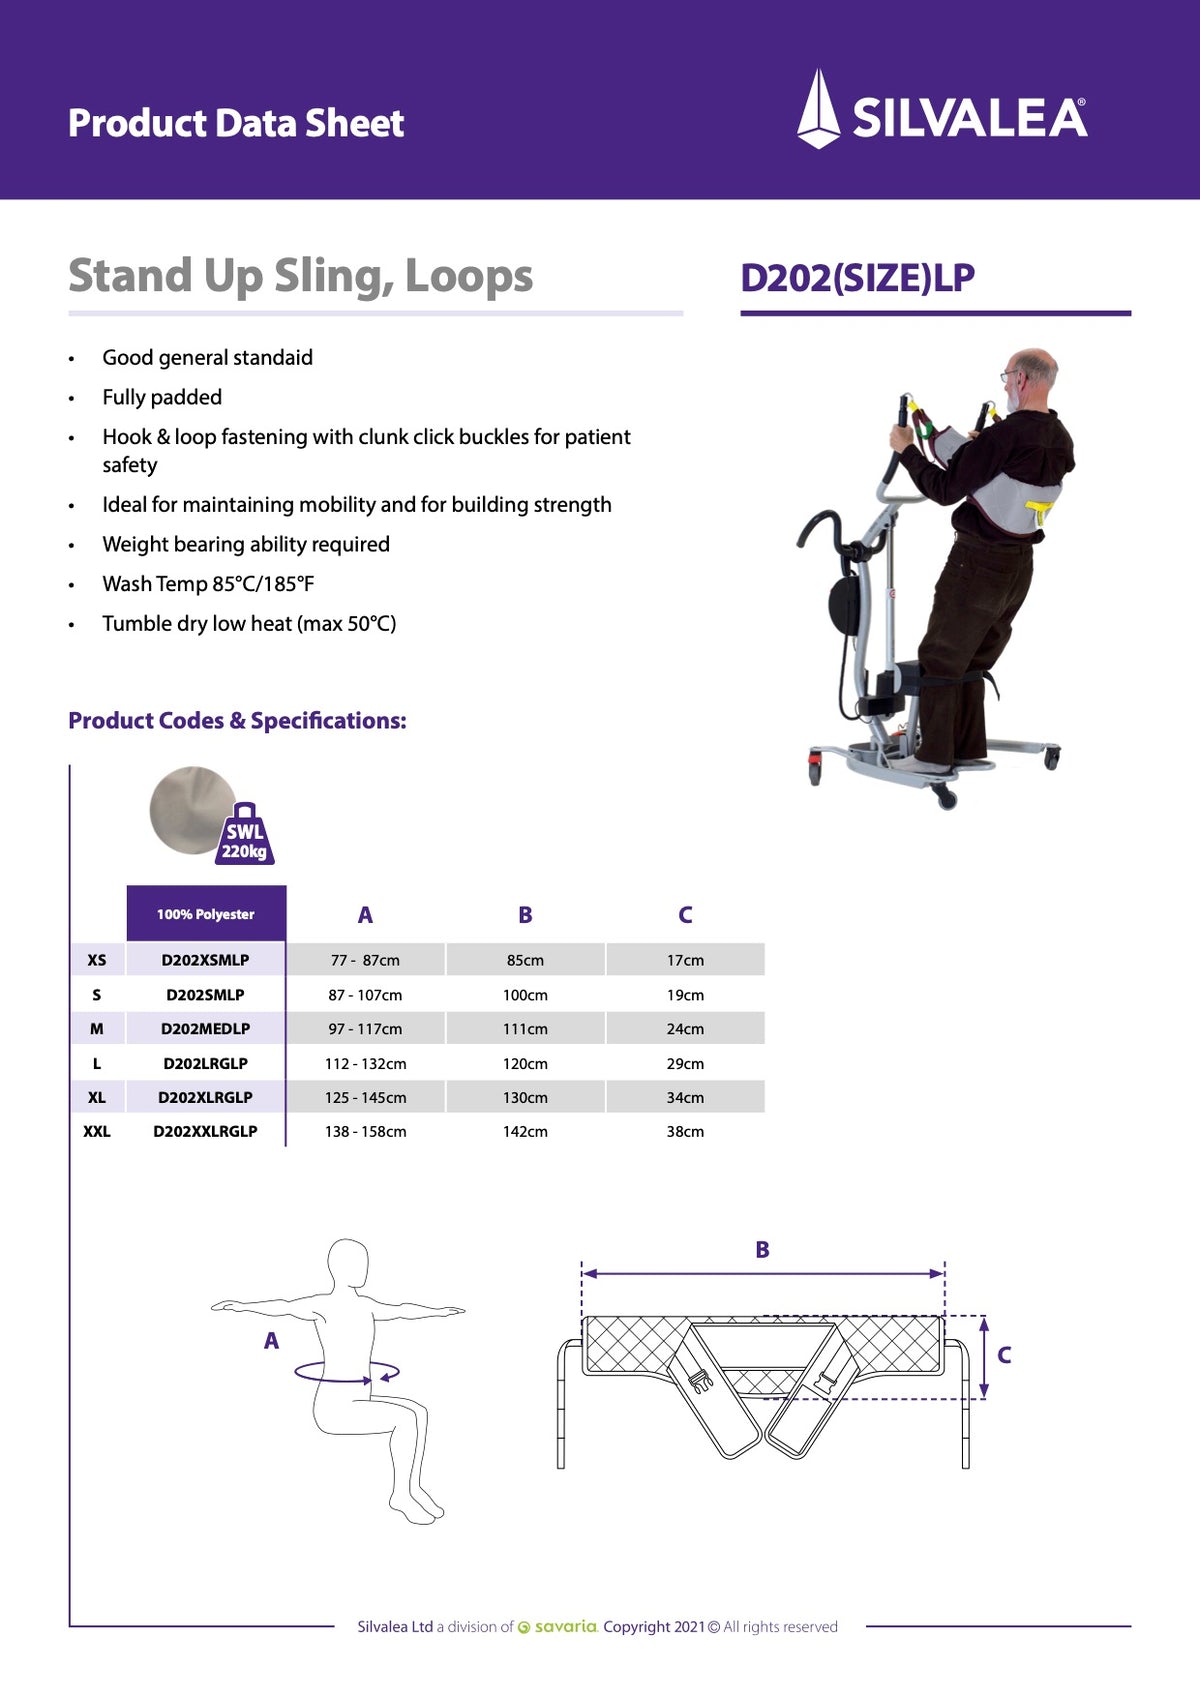 Stand Up Sling